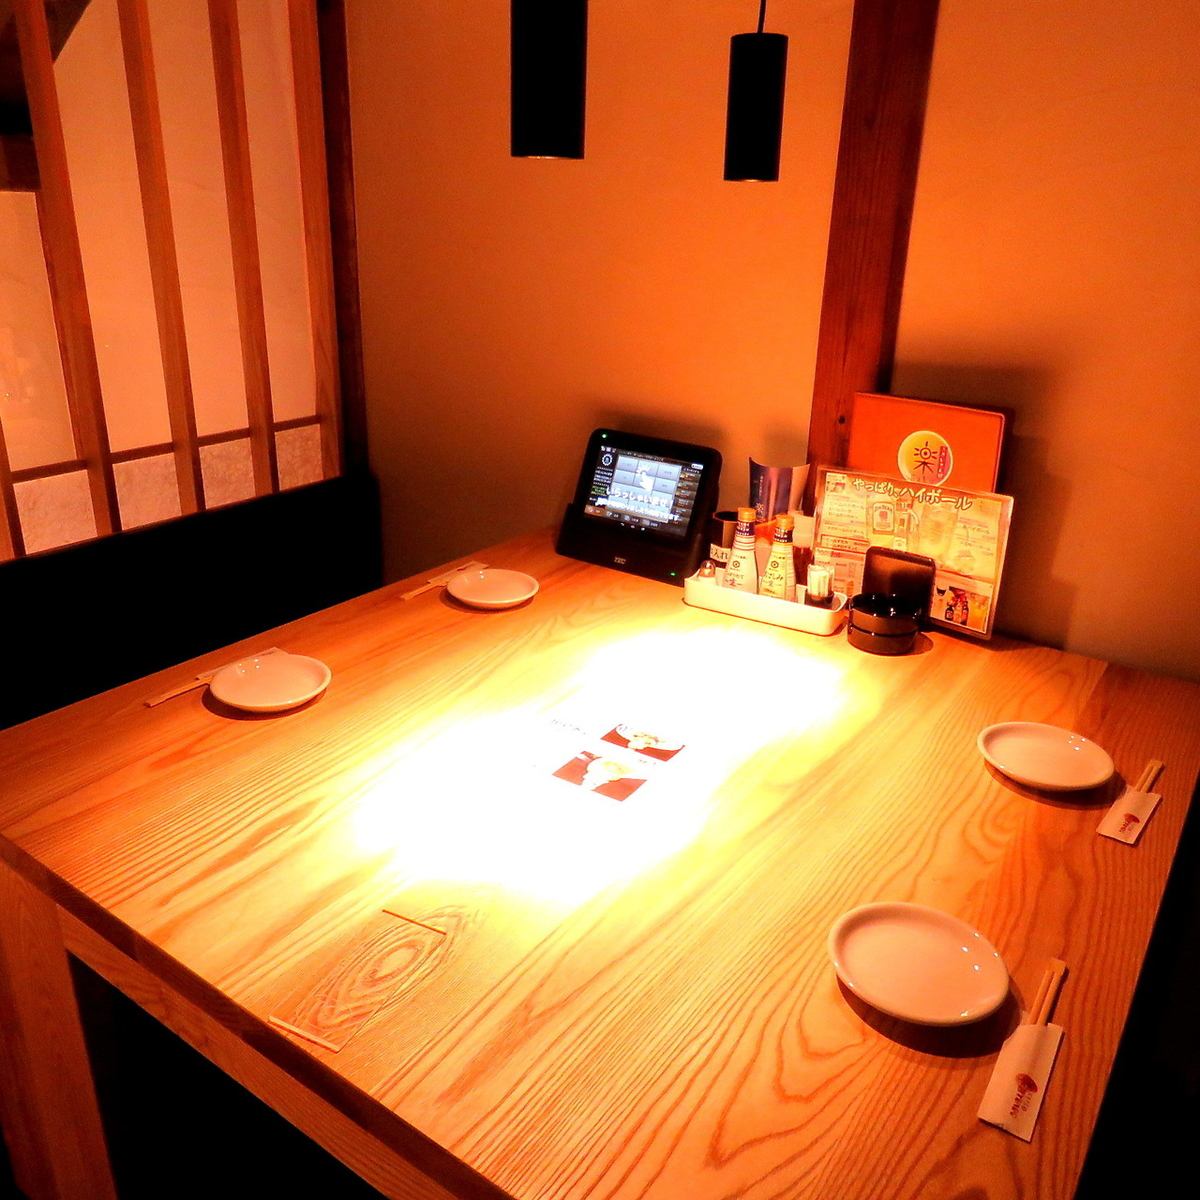 "Raku Okihama", which has various types of seats, is perfect for dates and anniversaries.